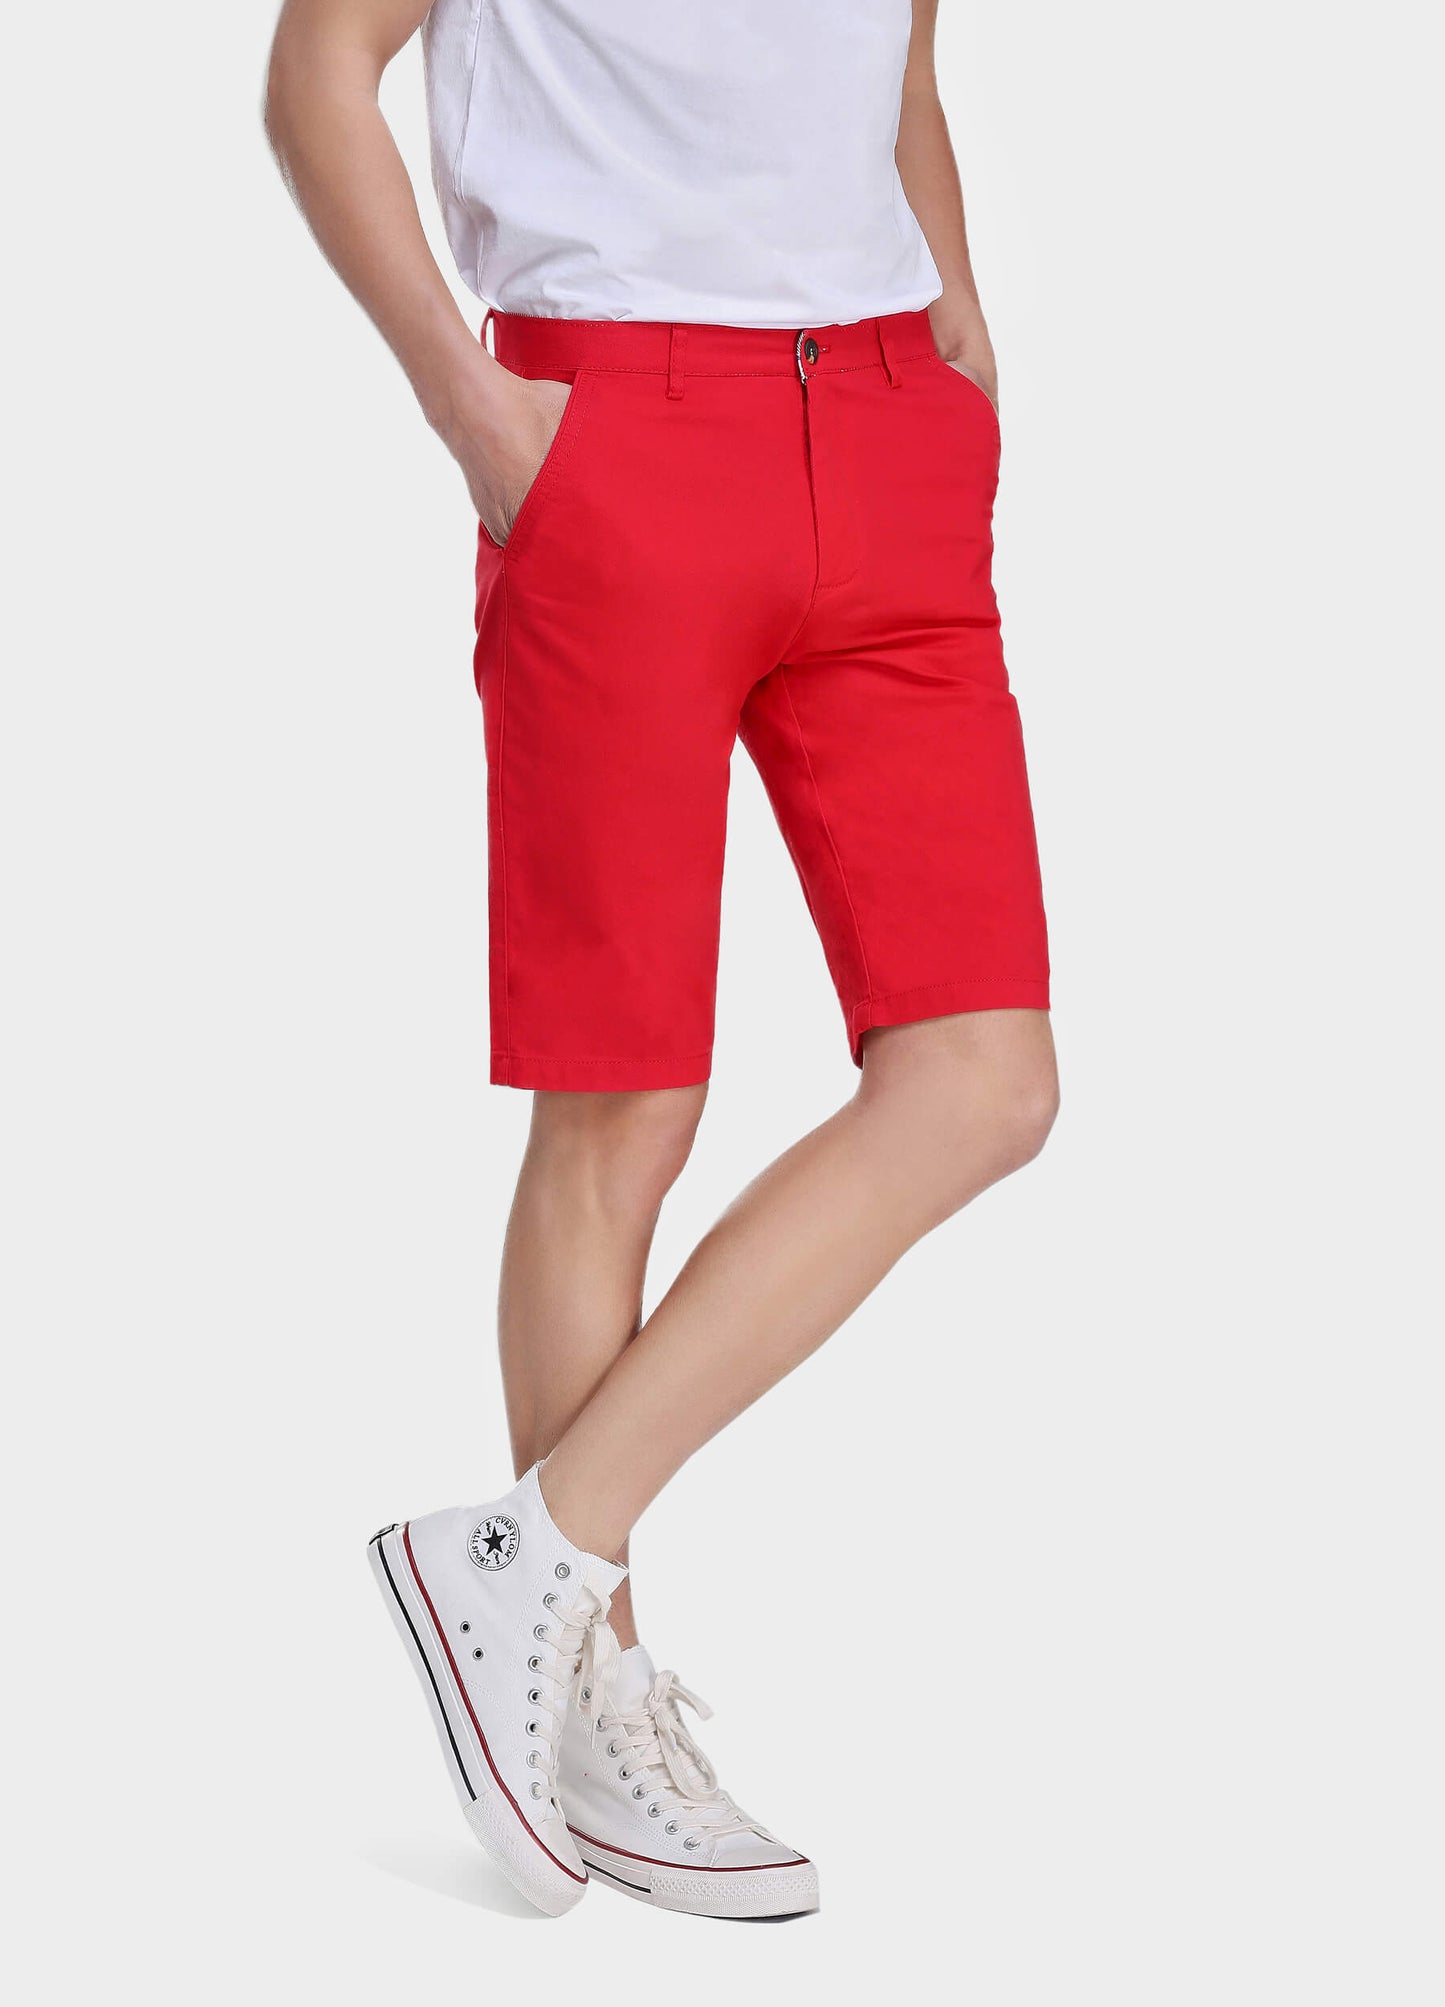 Men's Casual Zipper Fly Button Solid Shorts with Slant Pocket-Red